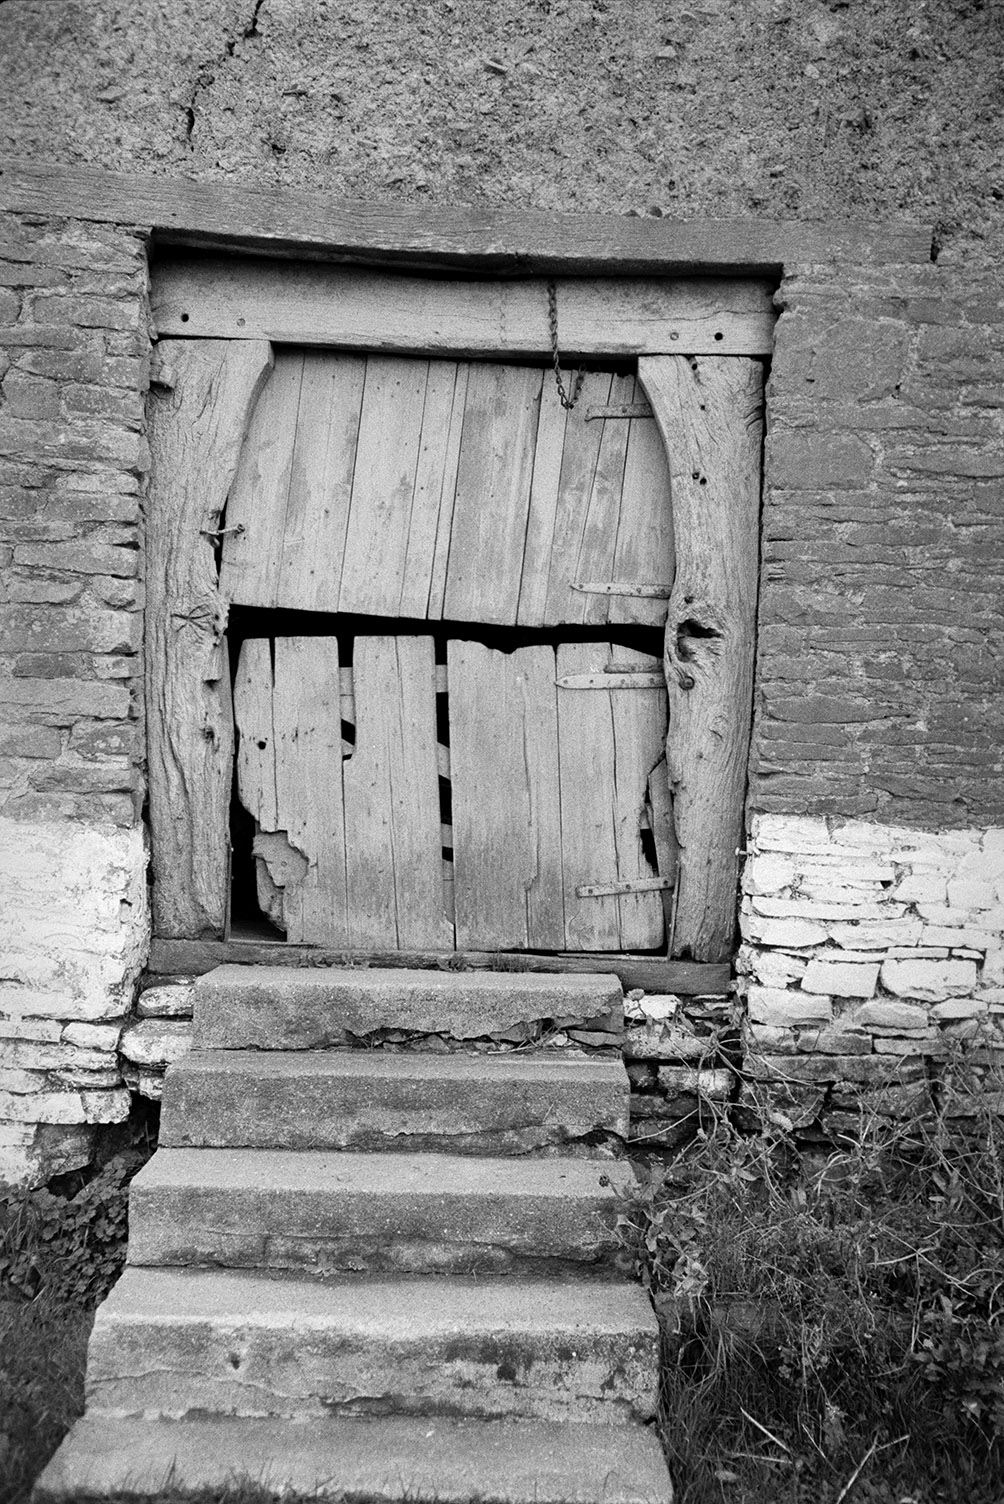 Steps leading up to a wooden stable door in a stone and cob building at Atherington.